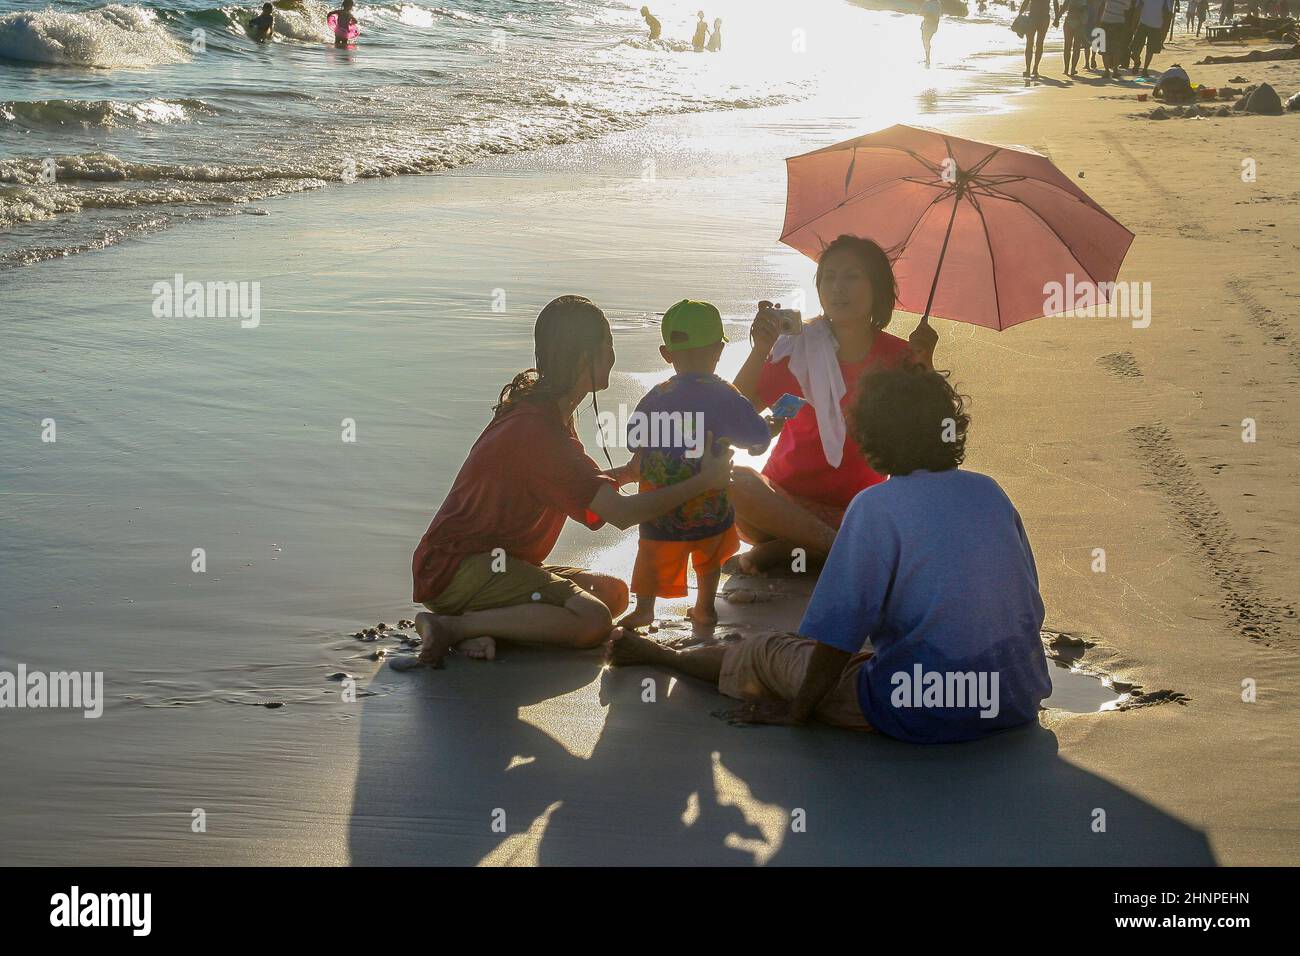 amily relaxes at the beach in Koh Samet in sunset. equipped with umbrella for sun protection they sit togethter at the beach. Stock Photo